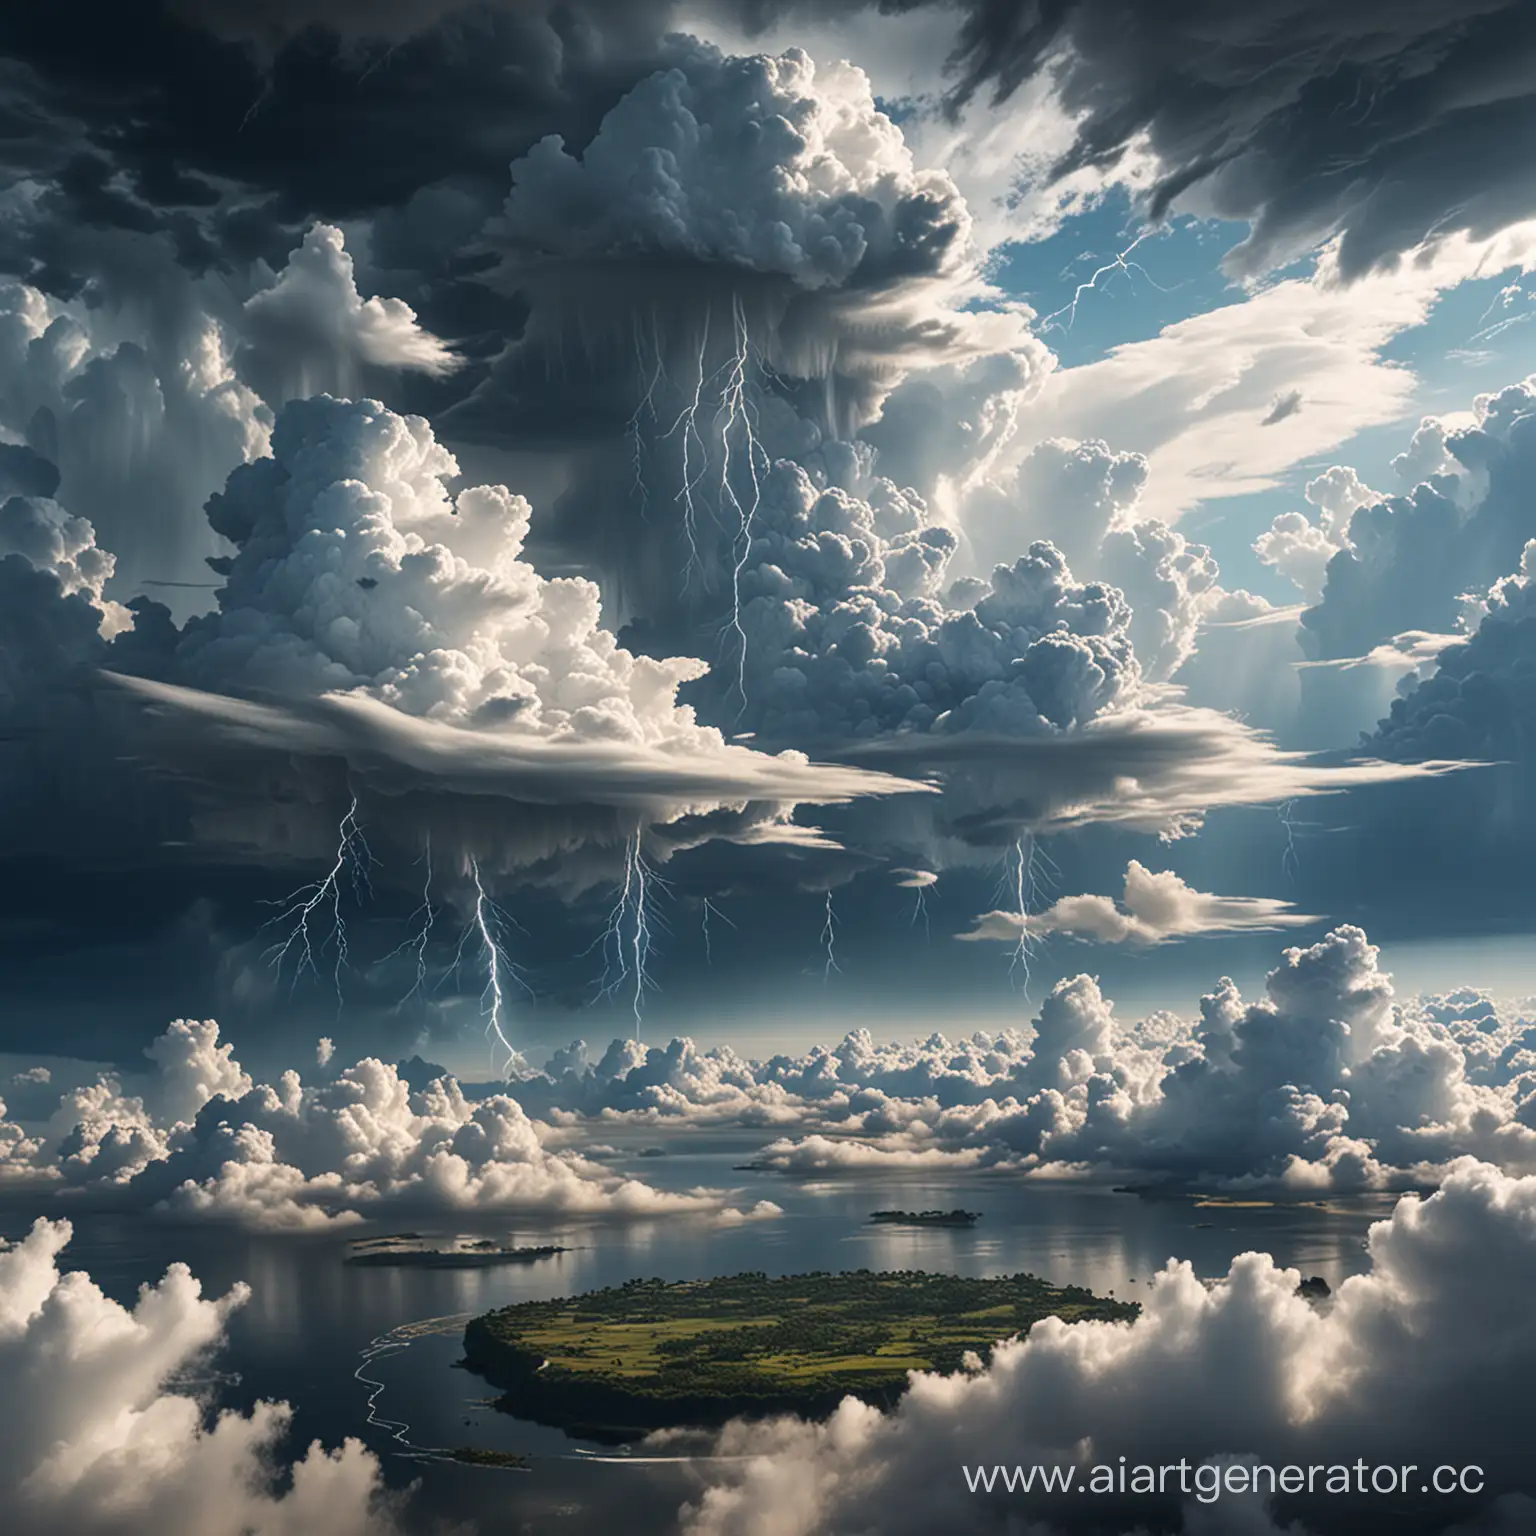 Mystical-Floating-Islands-under-Stormy-Clouds